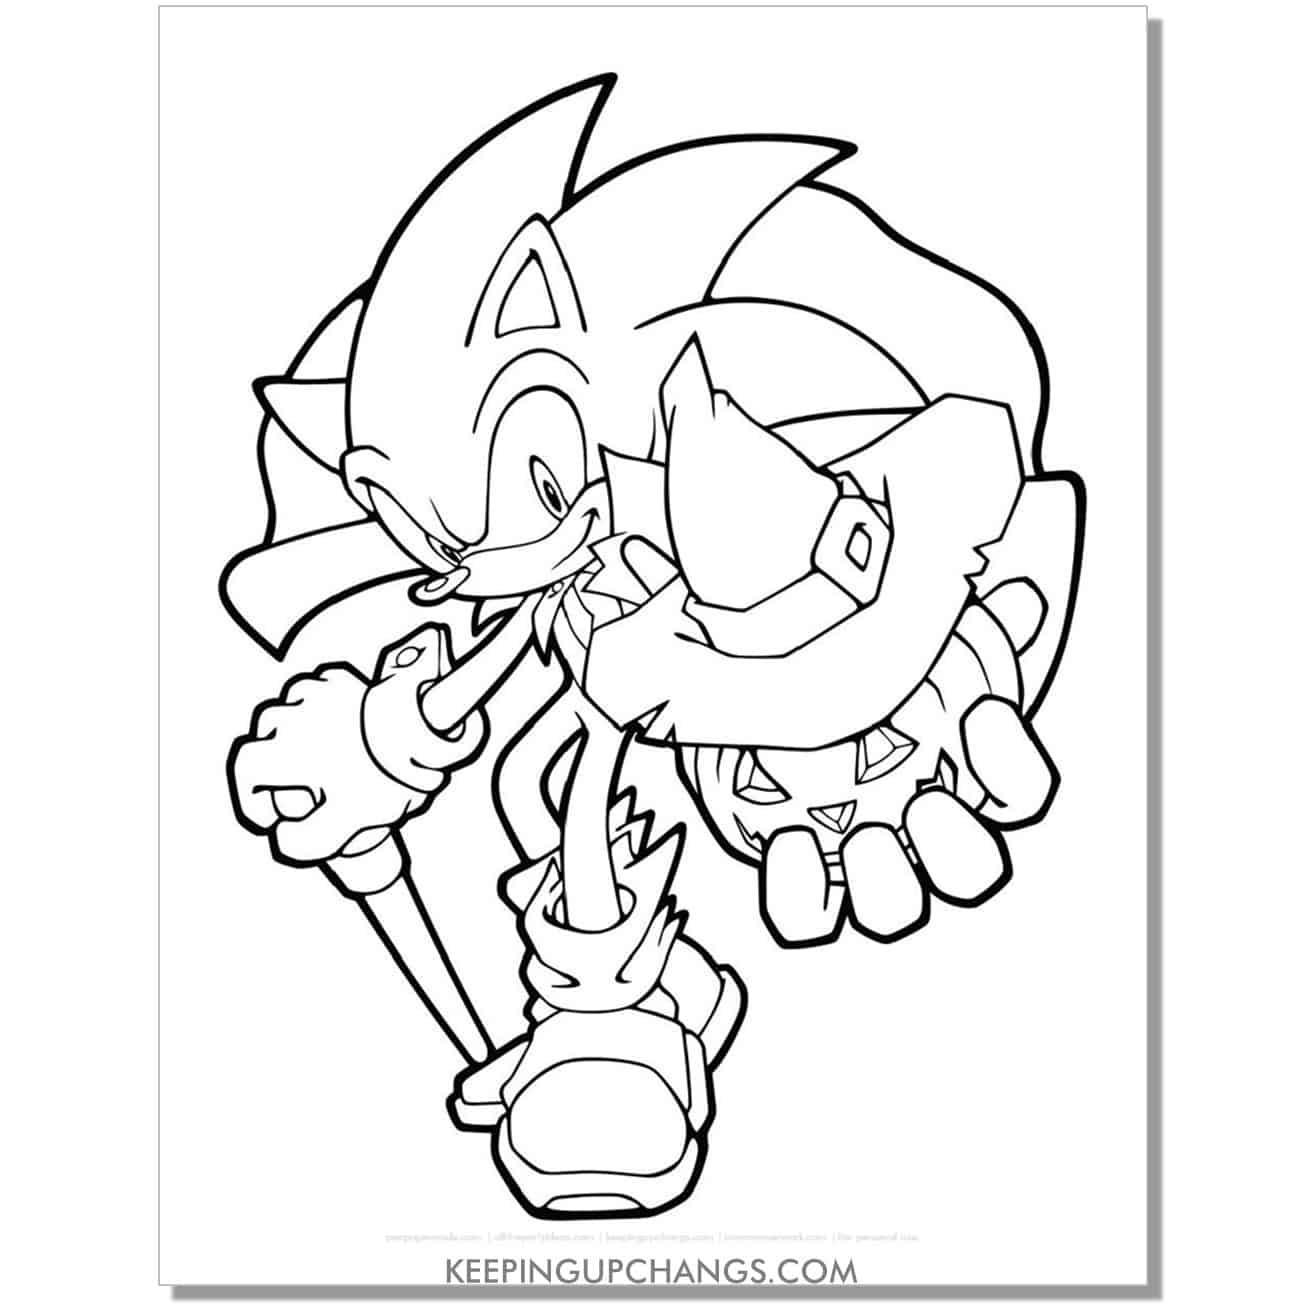 sonic halloween coloring page.